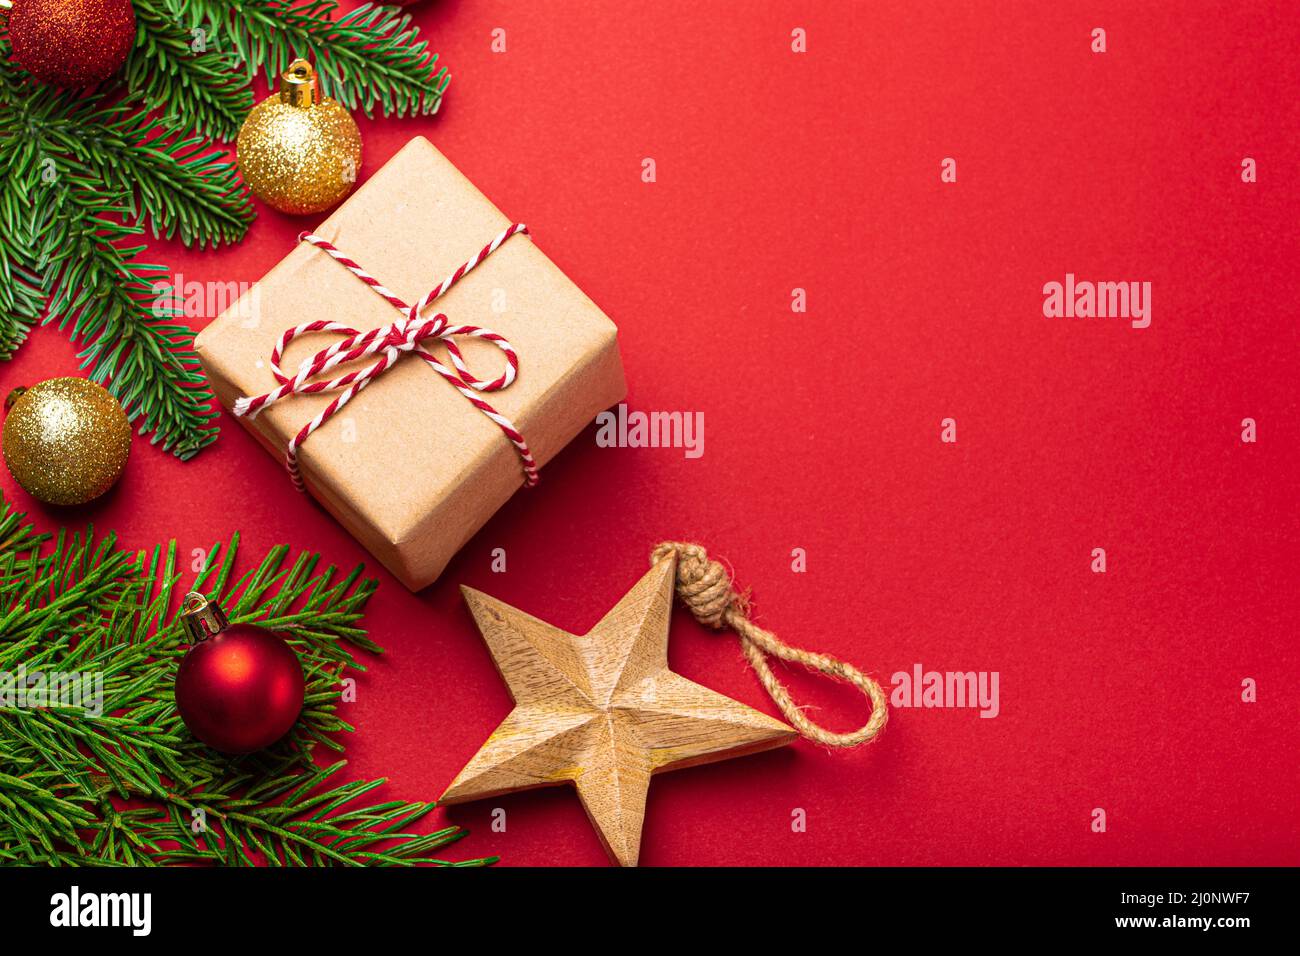 Christmas decorations, fir tree, present on red background copy space Stock Photo